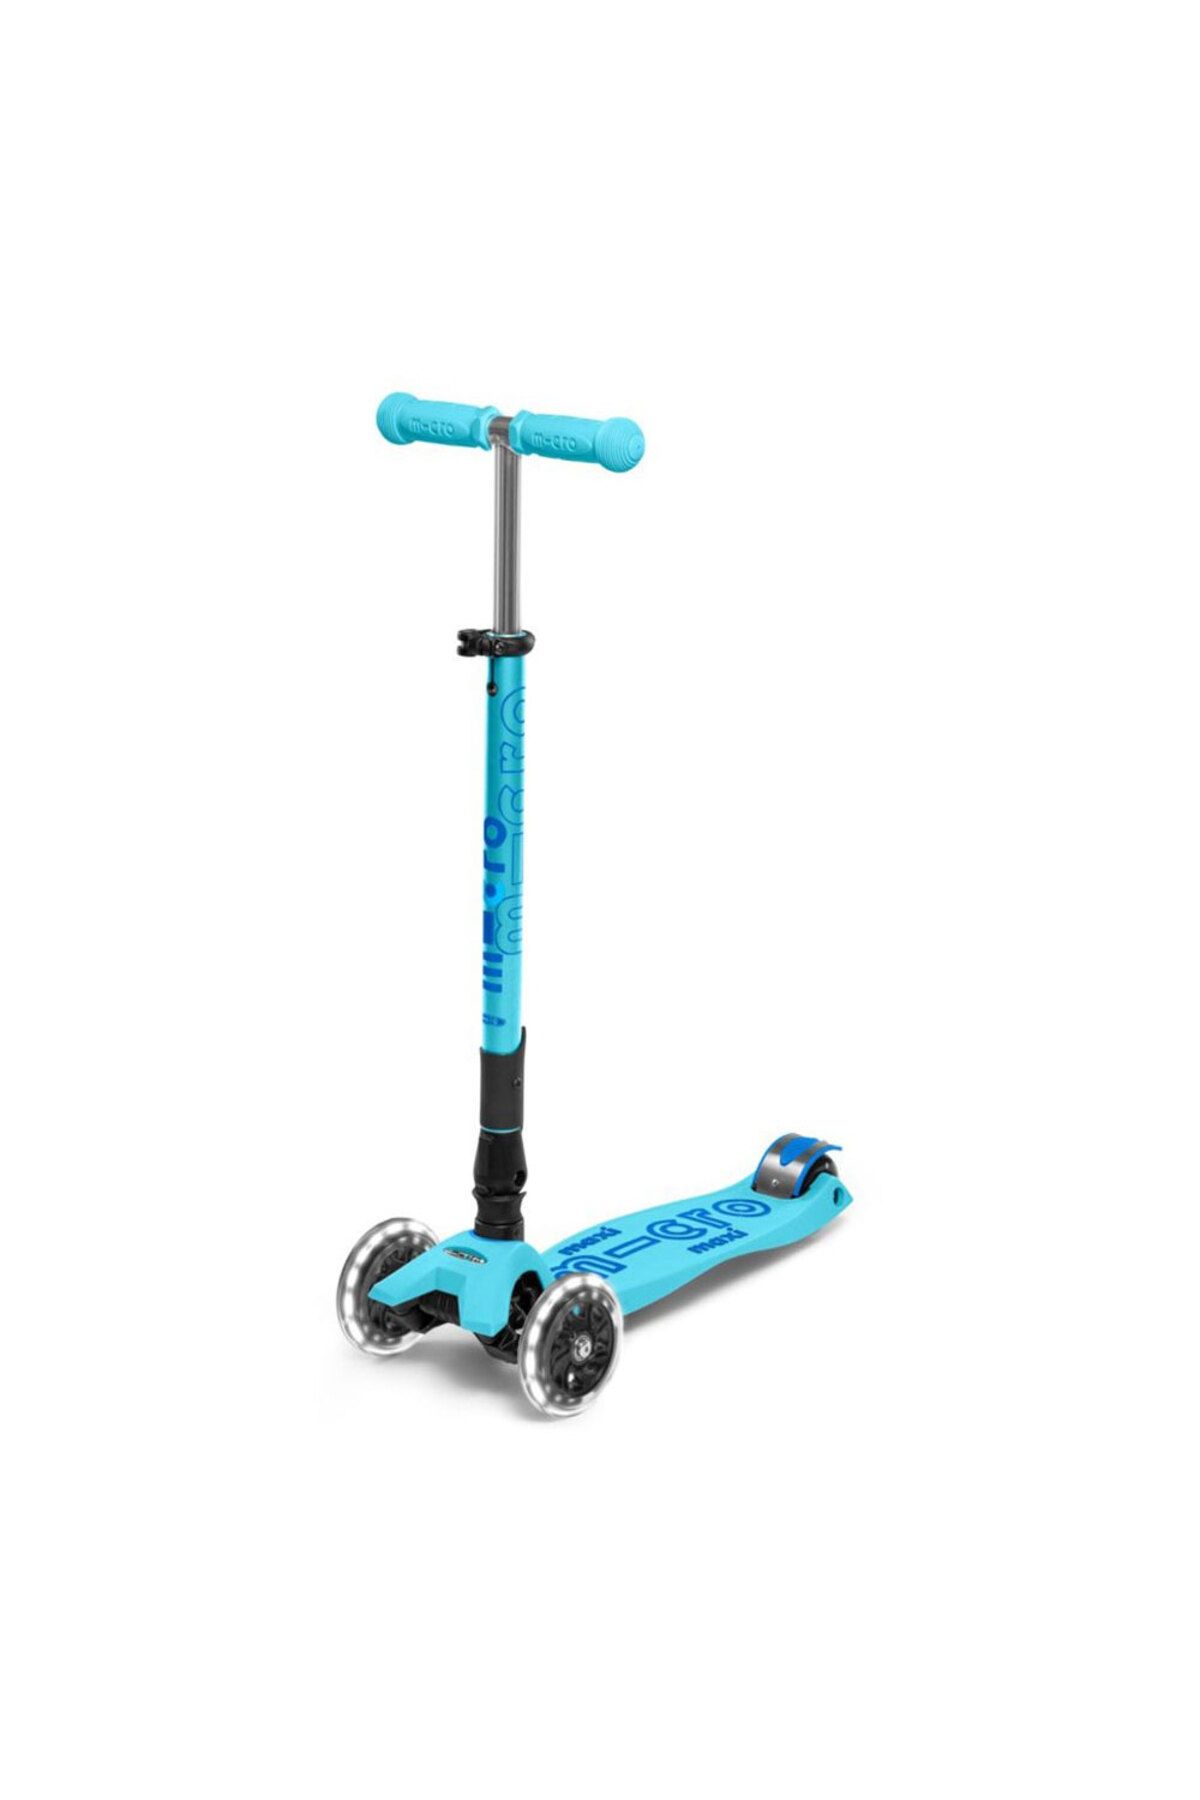 Micro Scooter Maxi Deluxe Led Bright Blue Katlanabilir Mmd092